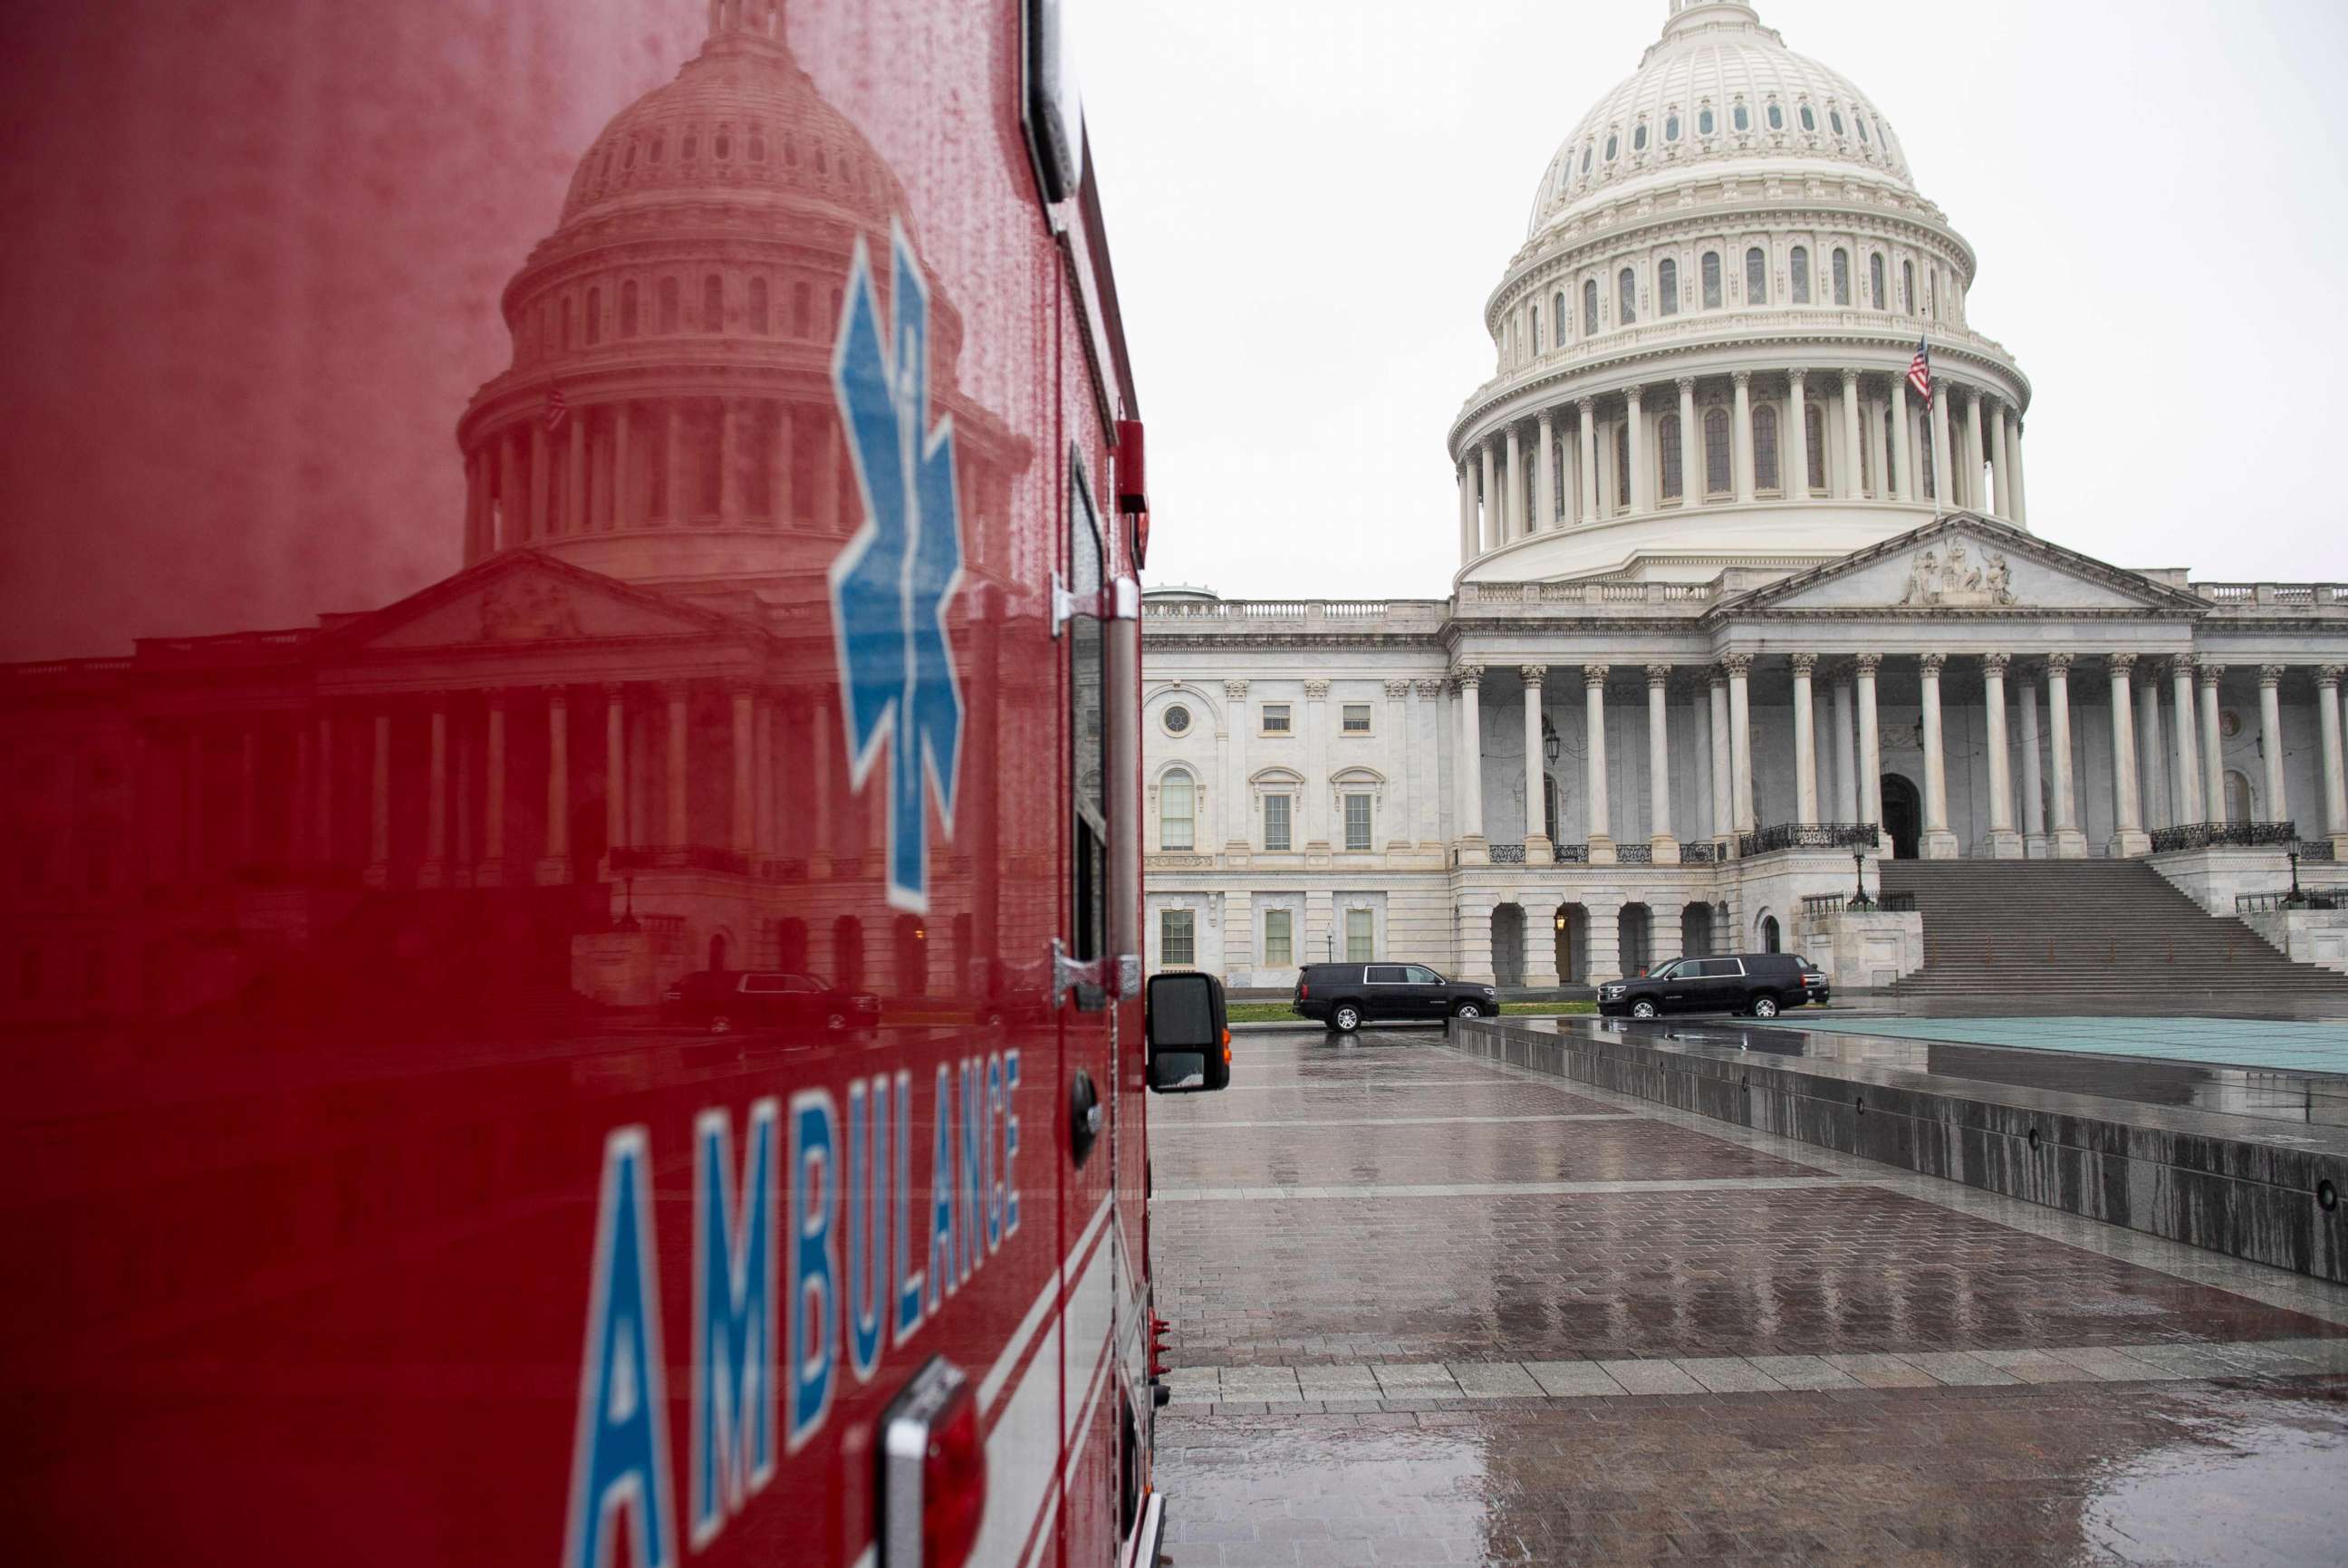 PHOTO: An ambulance sits outside the U.S. Capitol in Washington, D.C., on March 23, 2020, as the Senate continues negotiations on an economic relief package in response to the coronavirus pandemic.